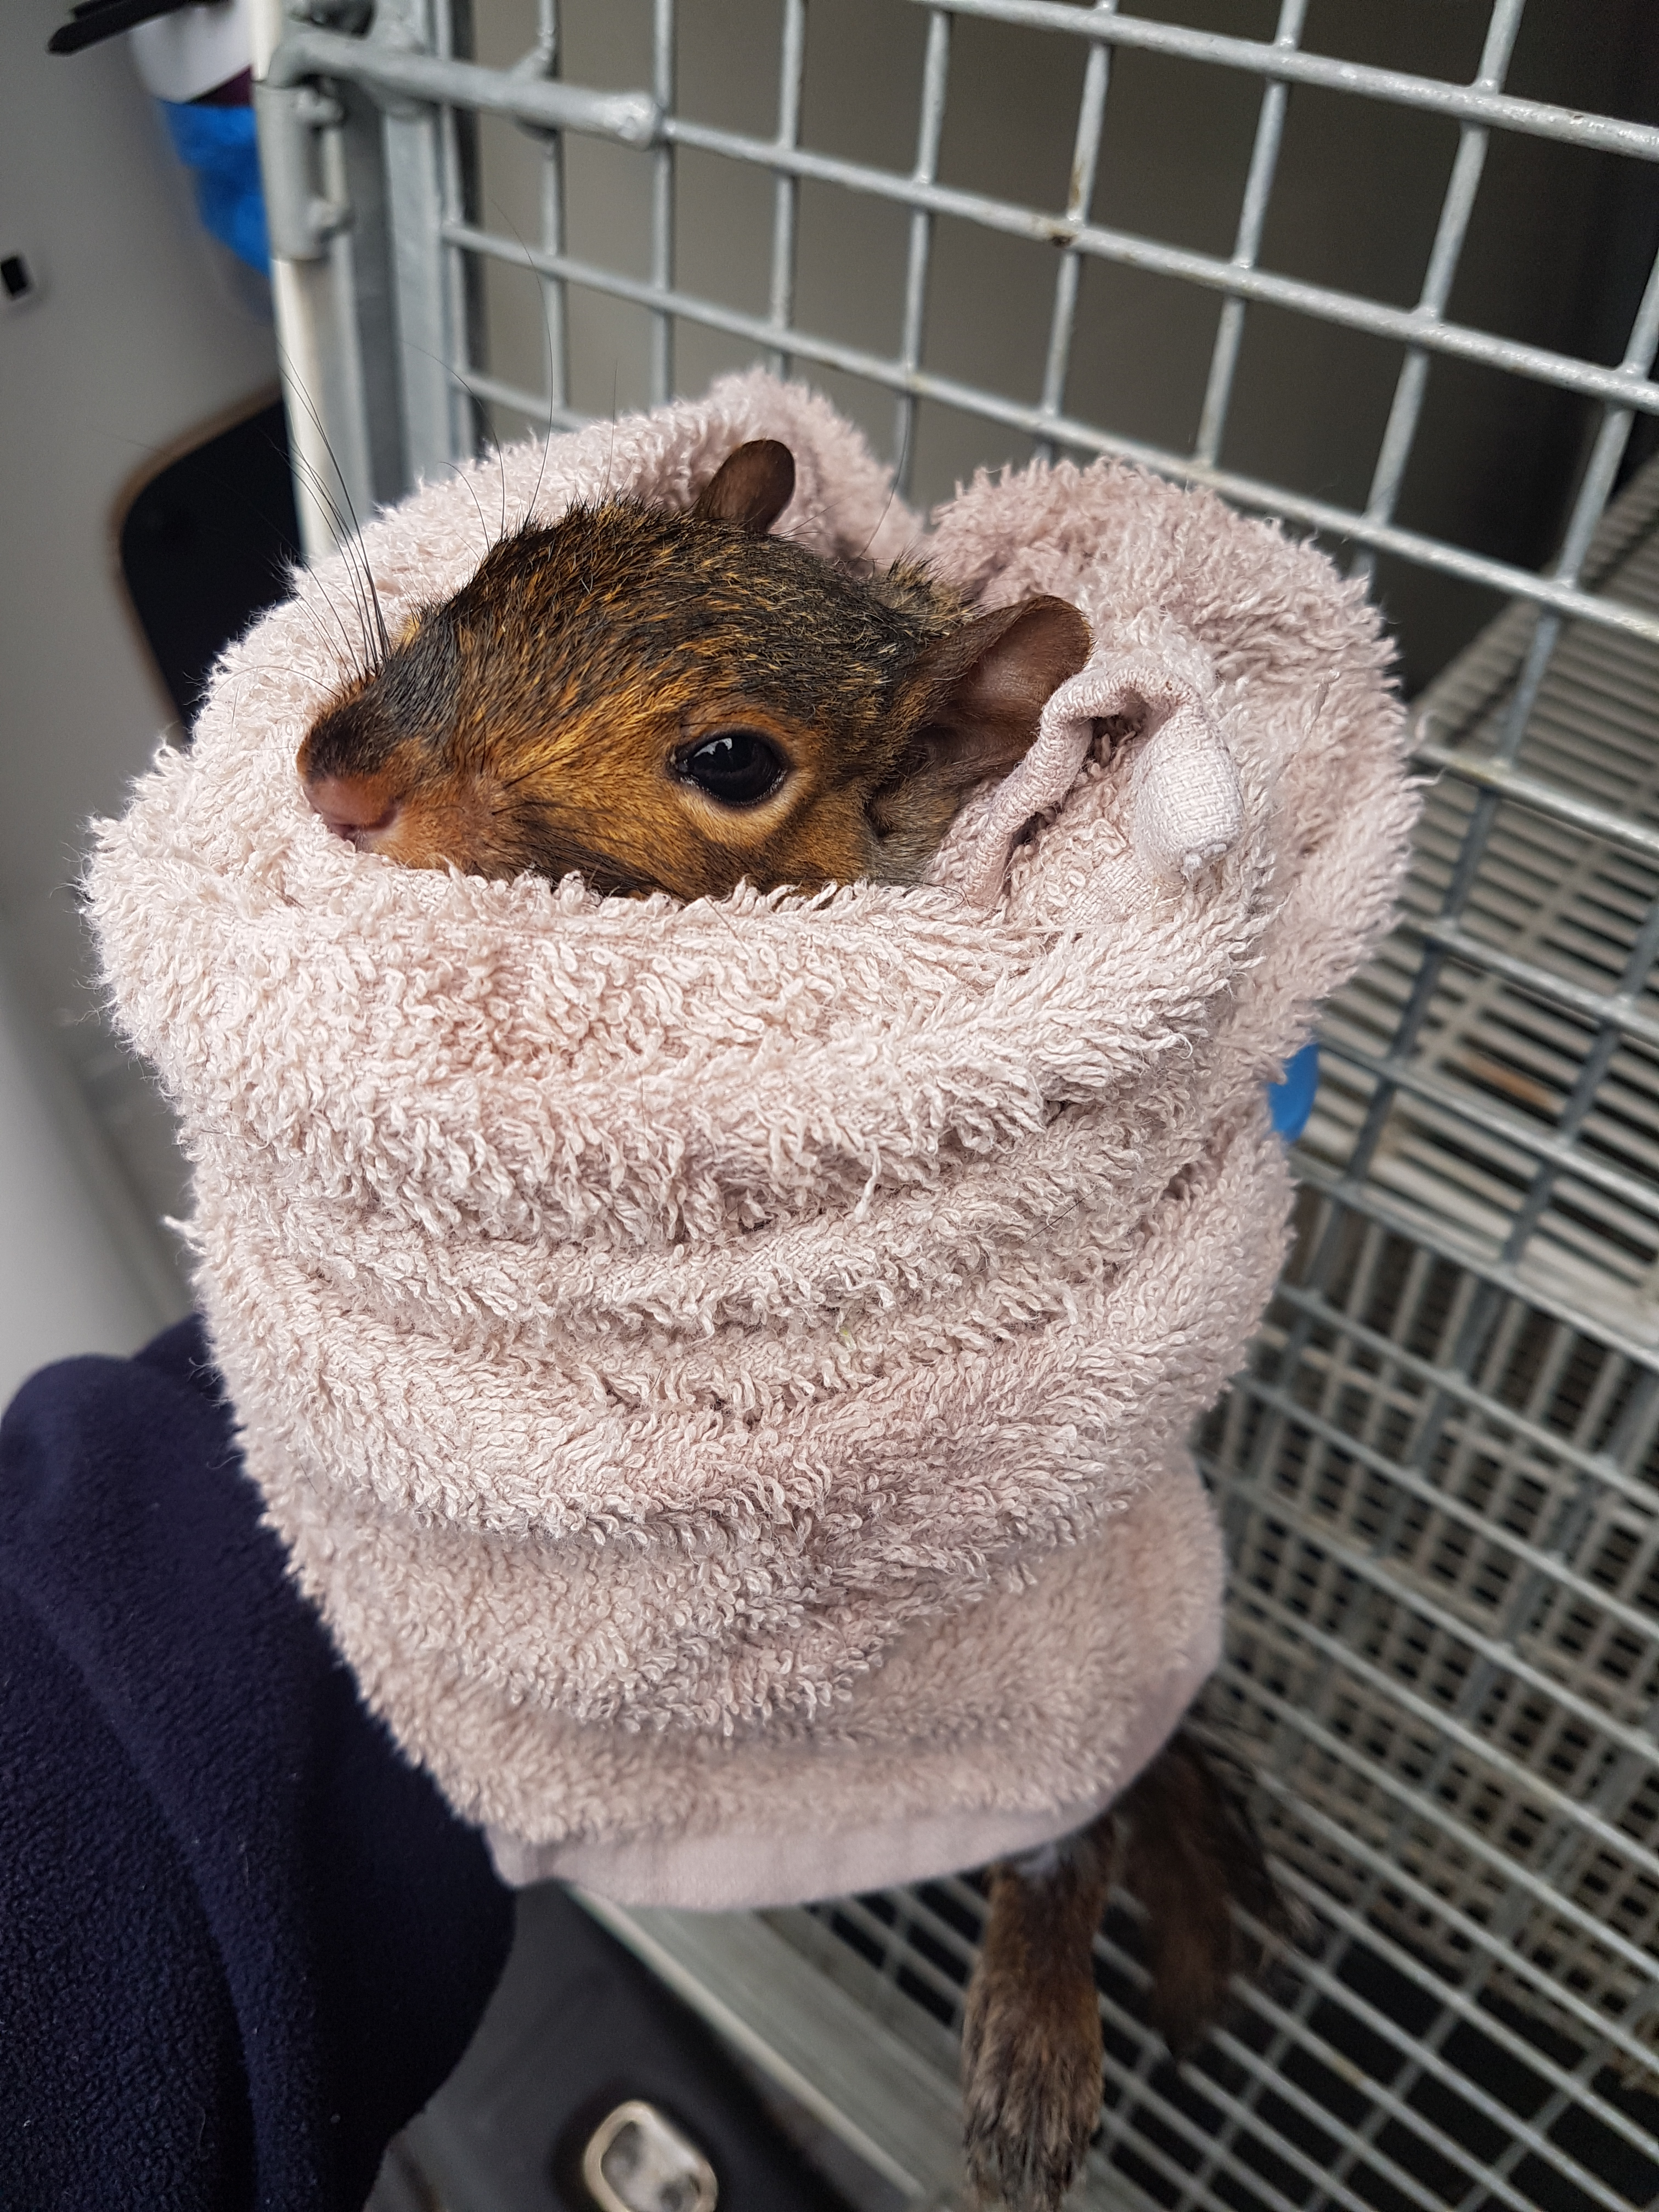 A squirrel rescued from a toilet by the RSPCA (RSPCA)